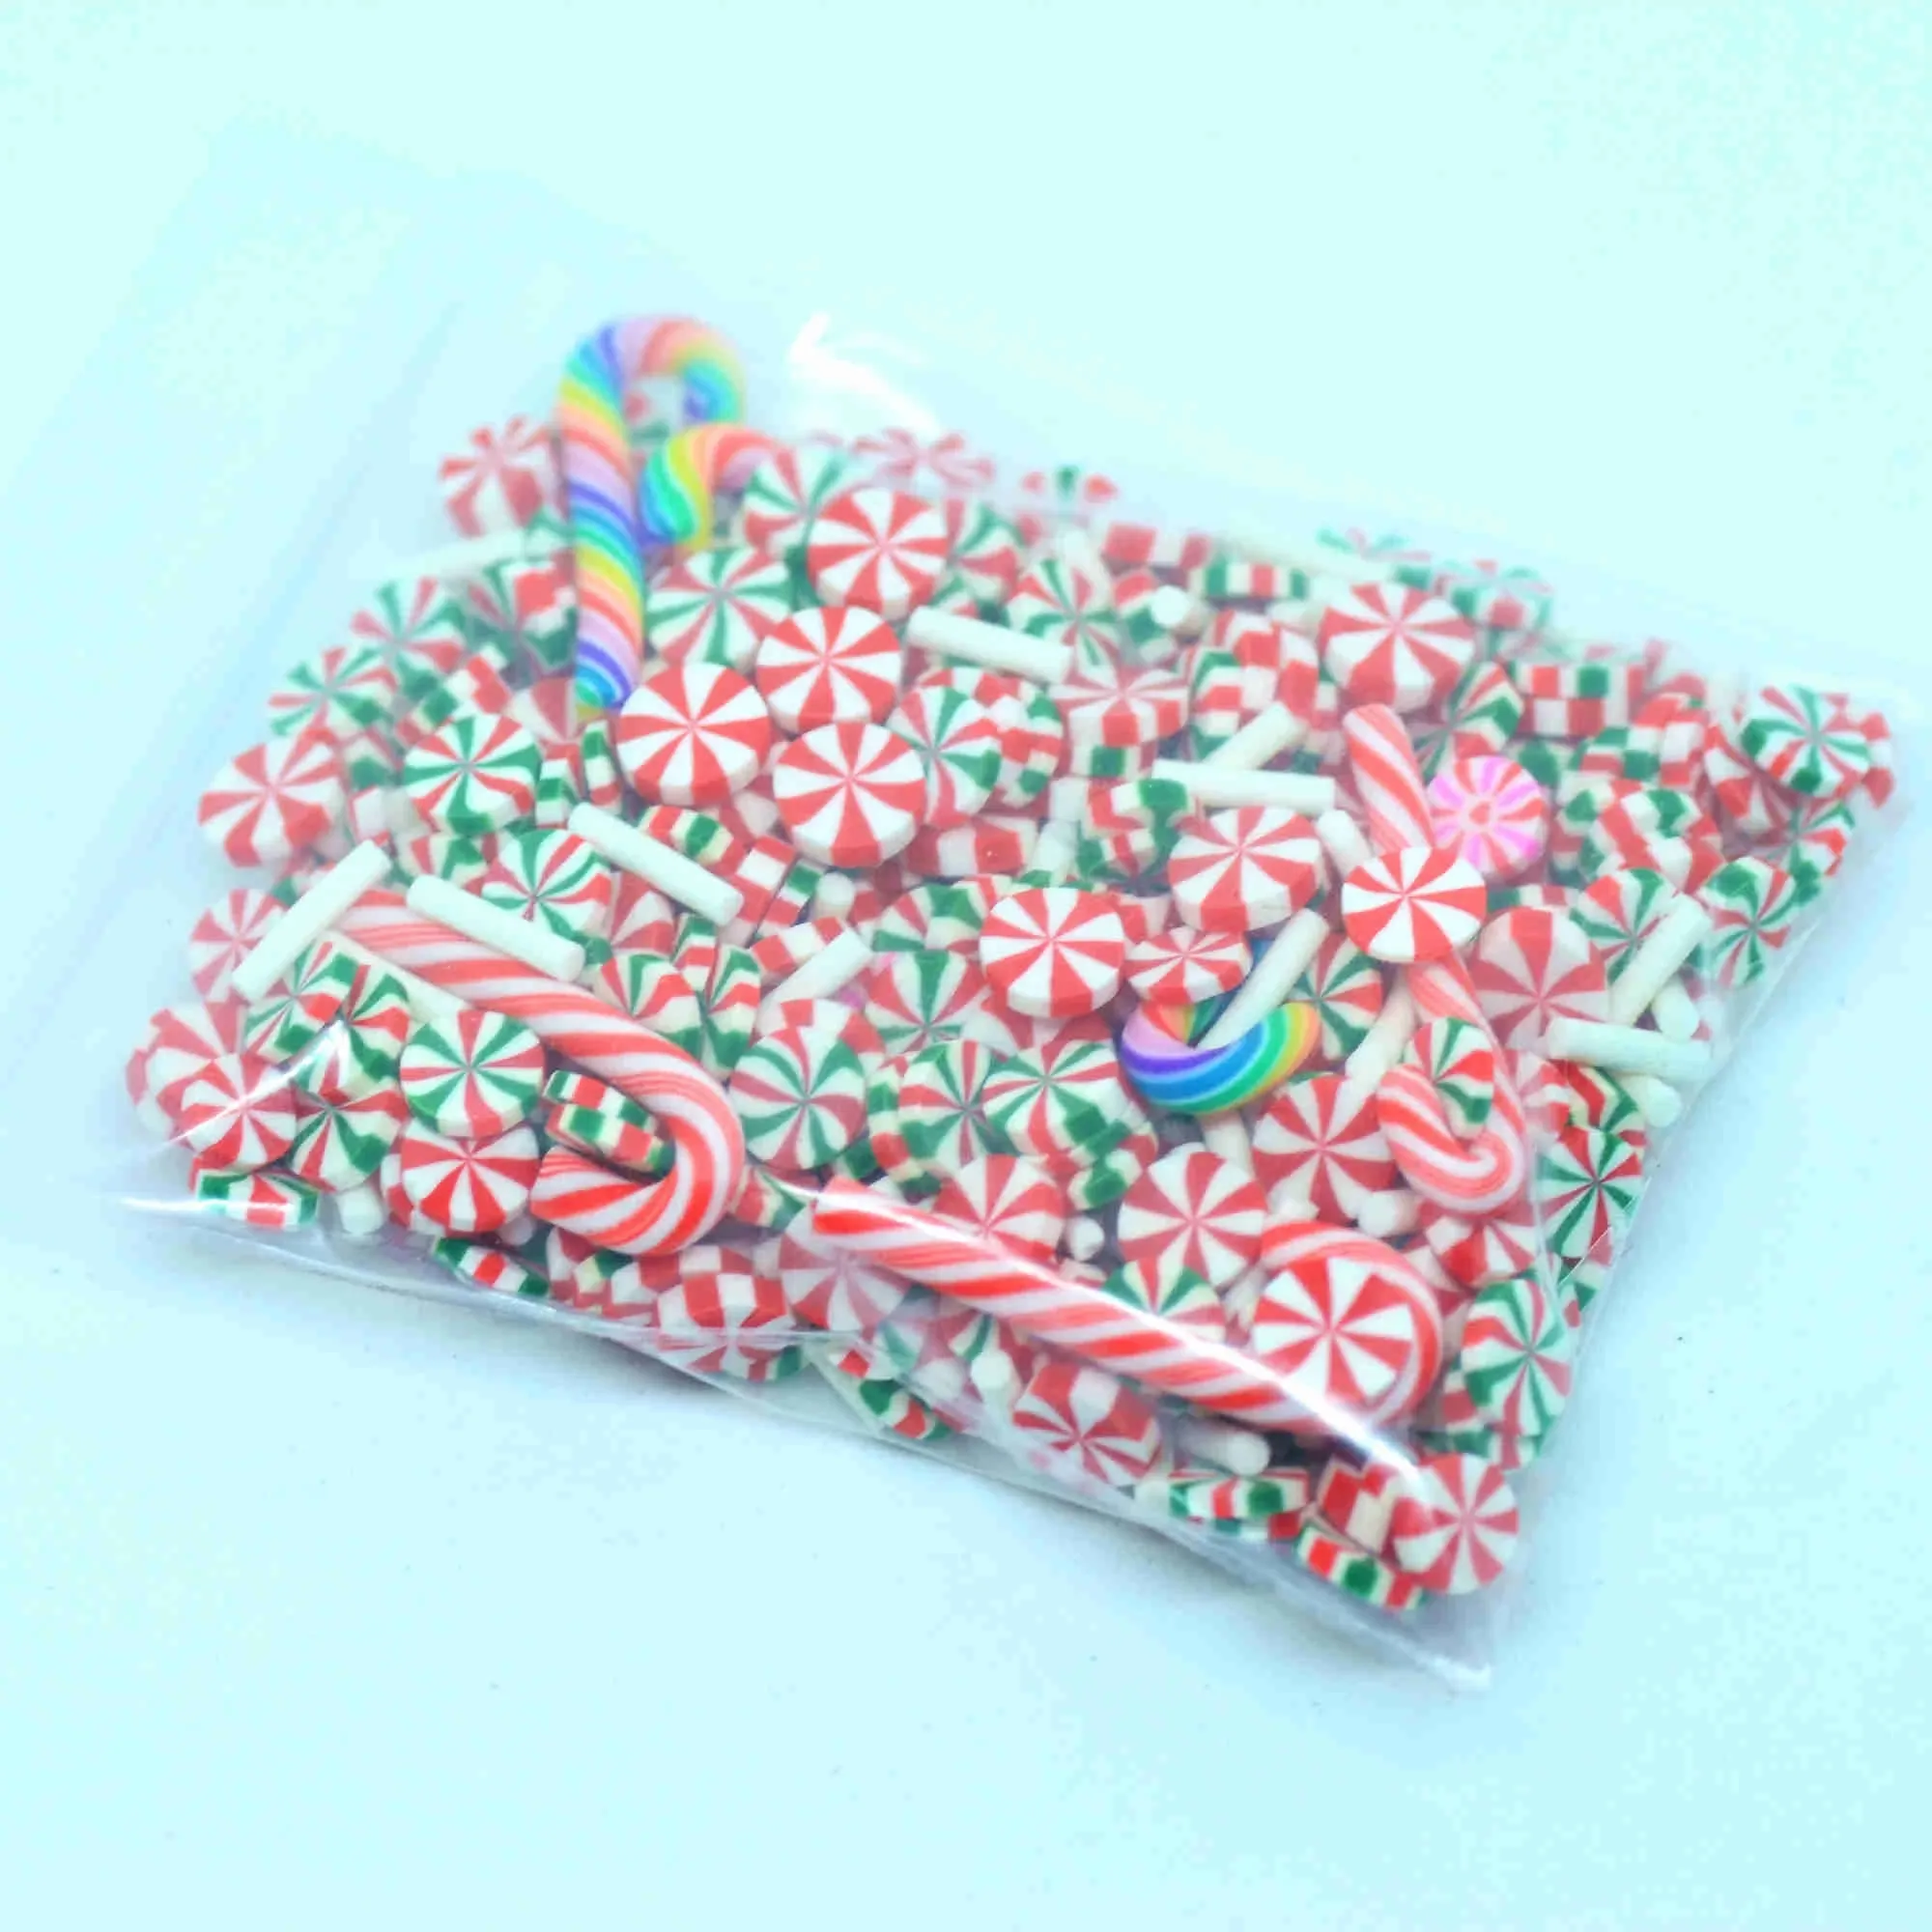 20g Christmas Color Decoration Sprinkles Polymer Clay Mixed Party Decoration Confetti-Slime Playing Supplements-Not Edible